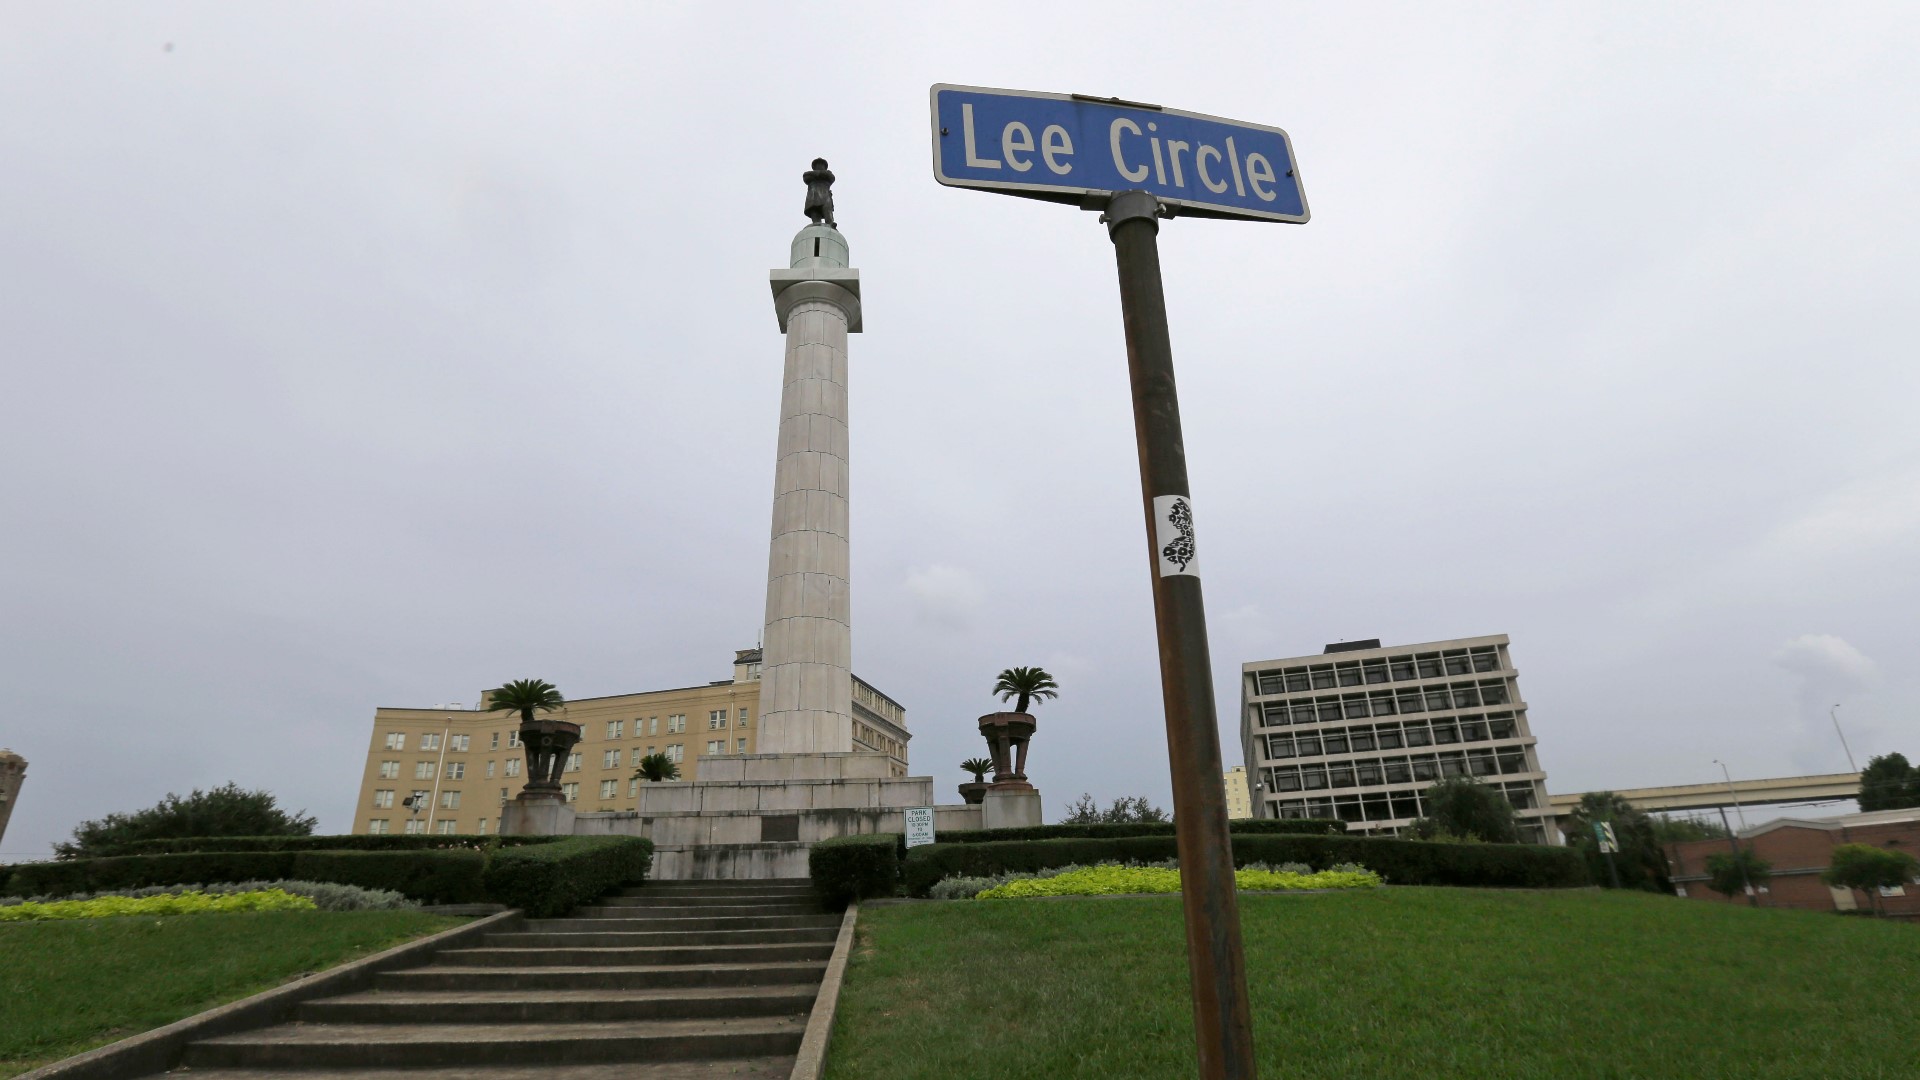 Lee Circle in New Orleans officially renamed 